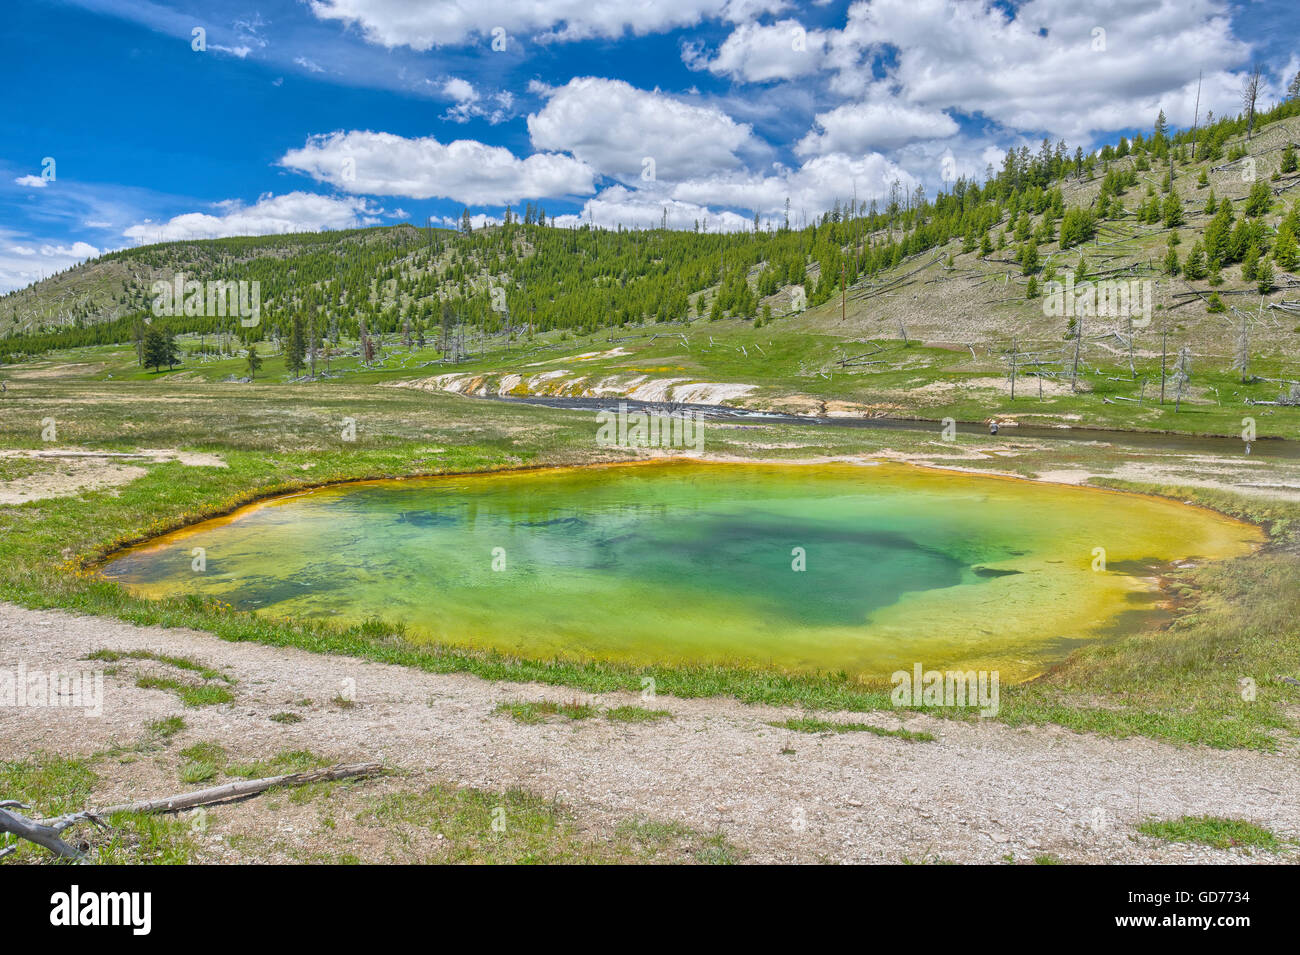 Opal Pool, a dead hot spring in Yellowstone National Park, United States Stock Photo